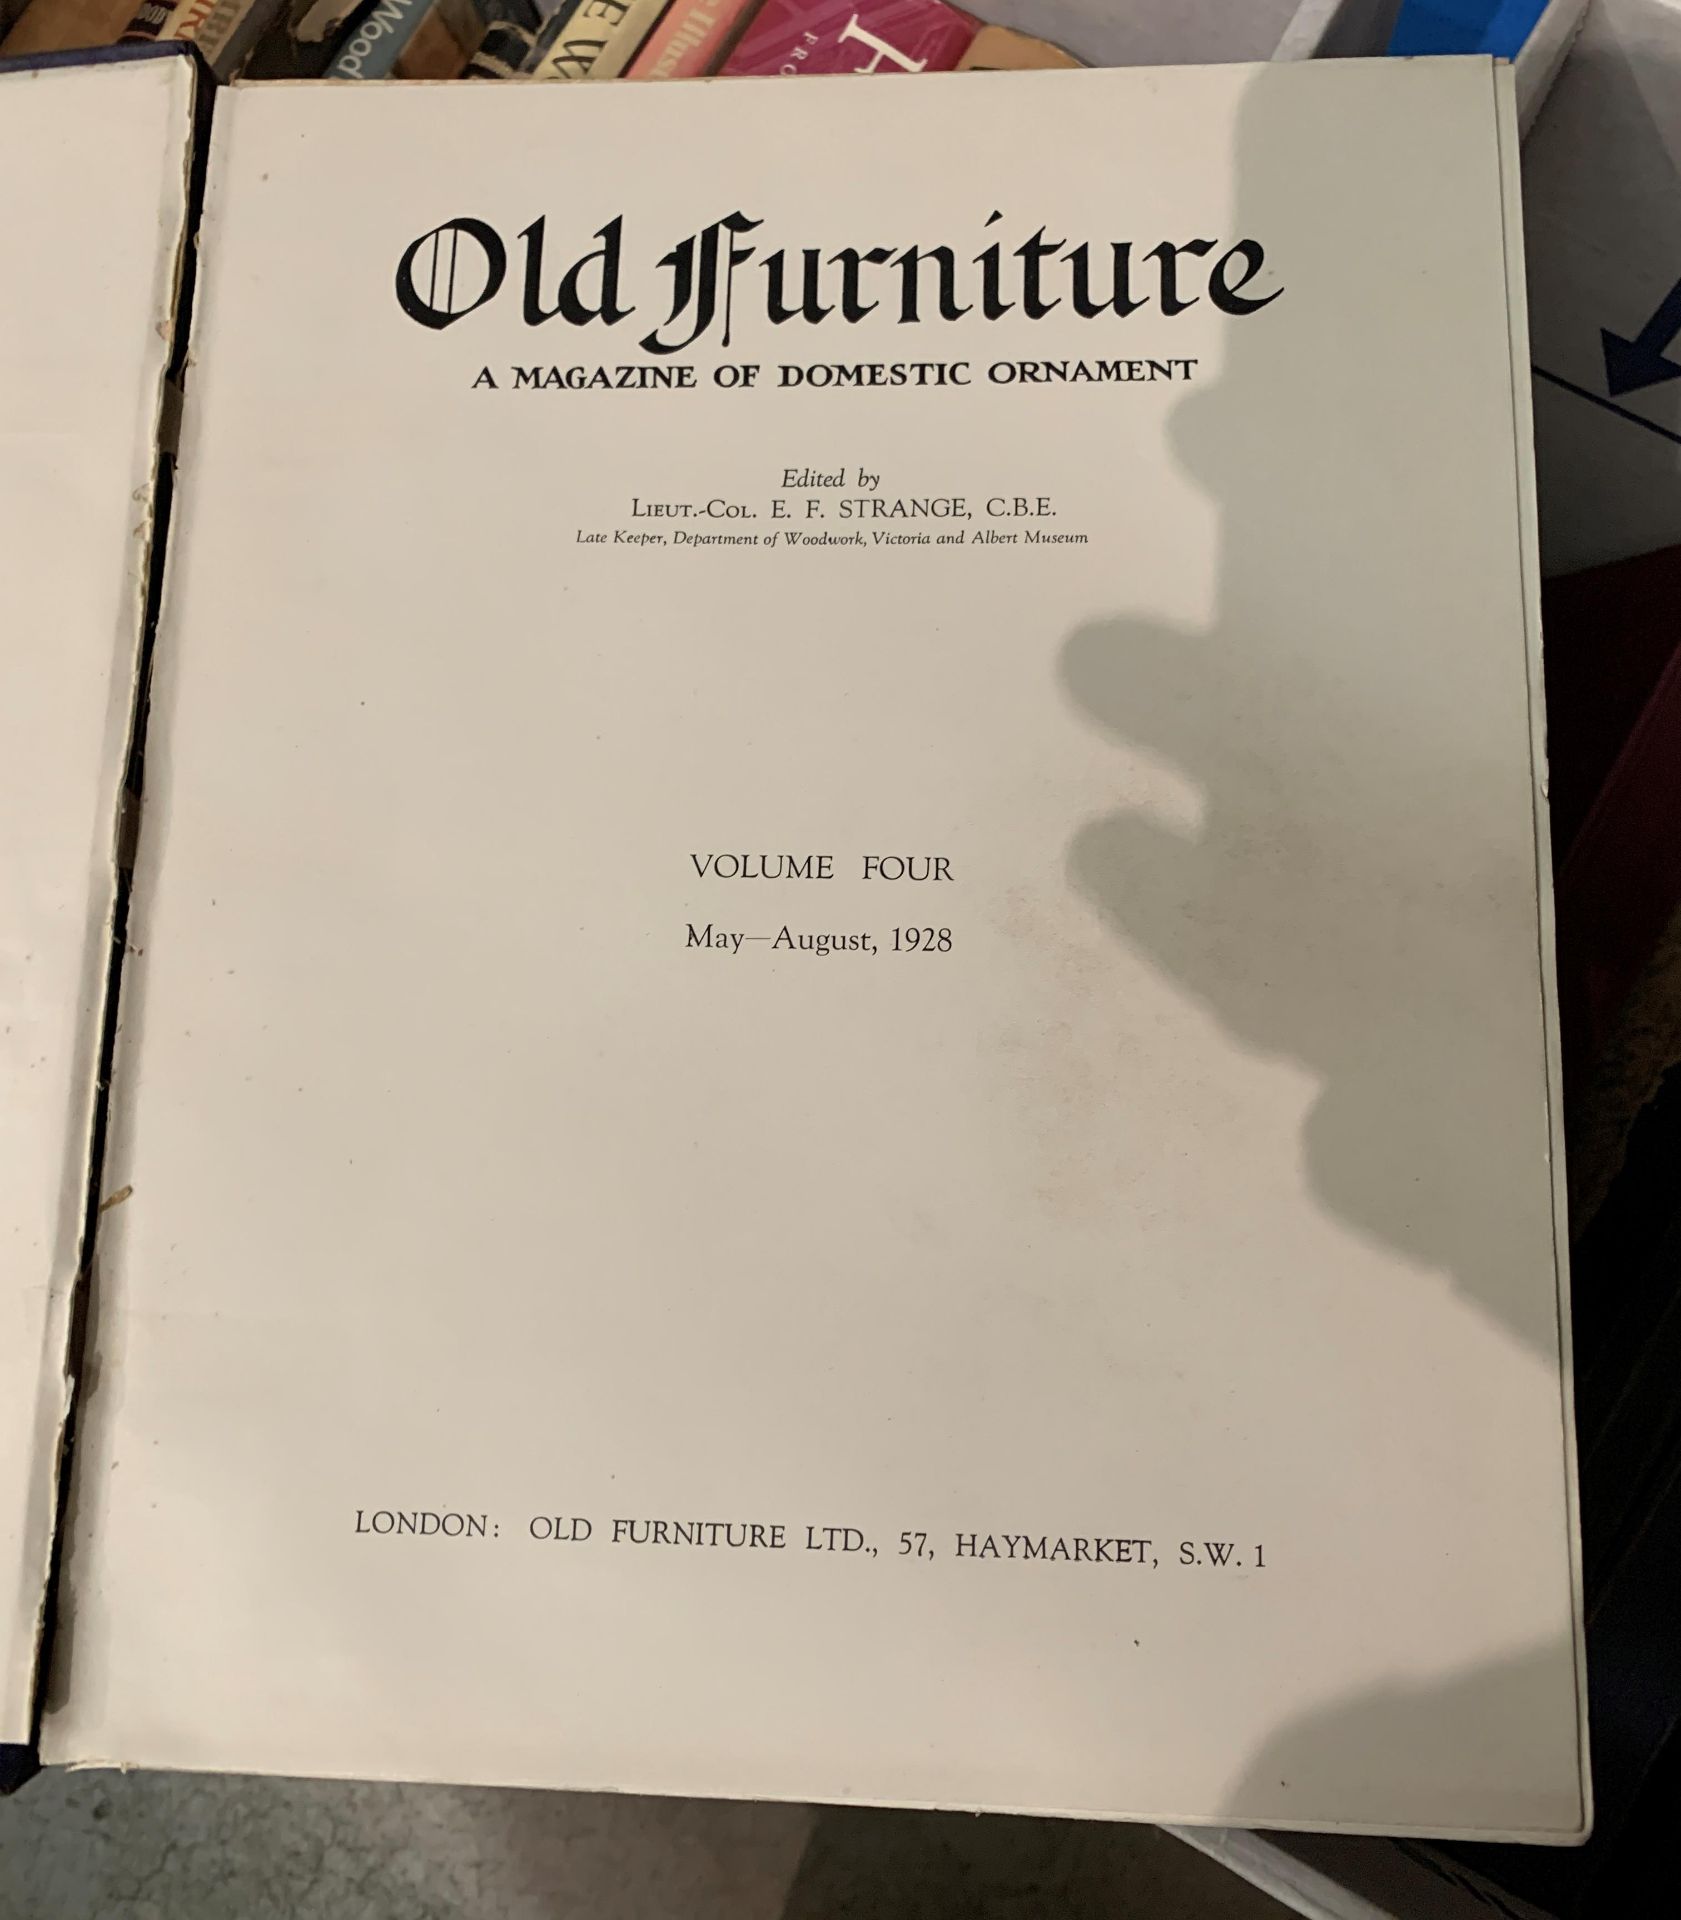 Contents to three boxes, various books on furniture, woodworking and metalwork, - Image 8 of 13